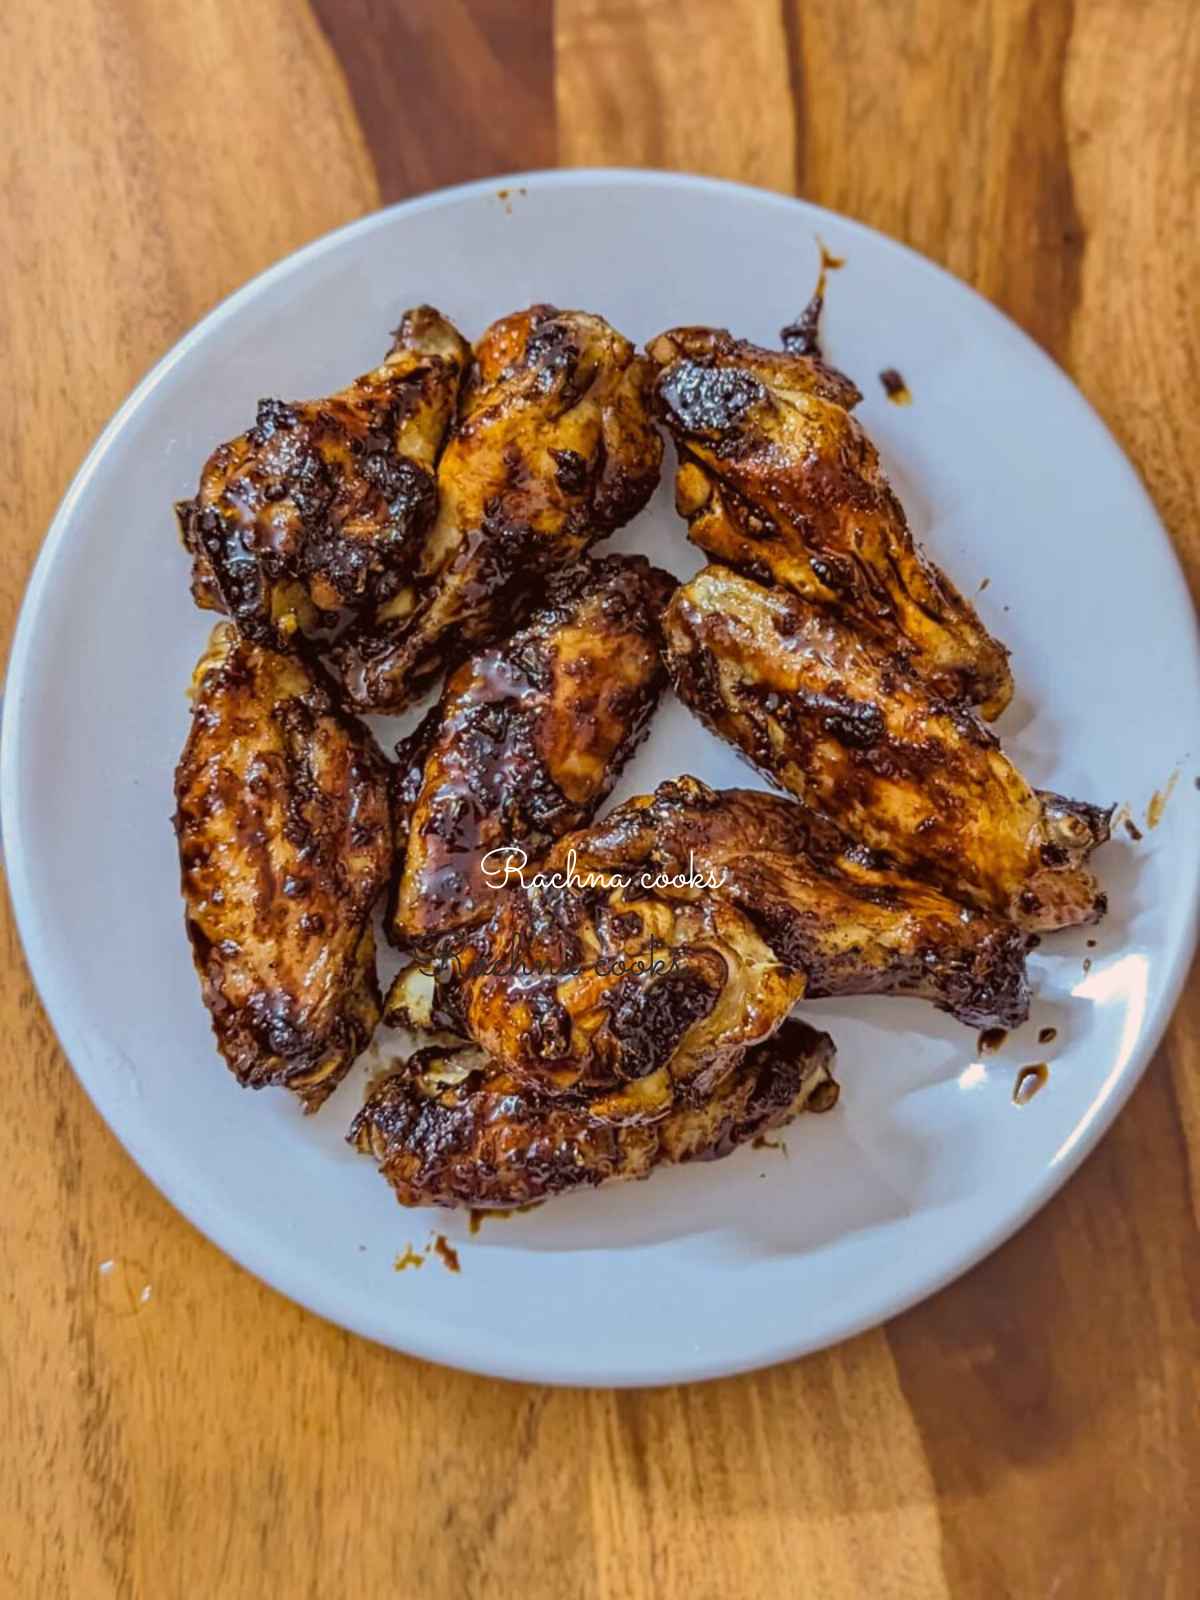 Honey garlic wings served on a white plate.